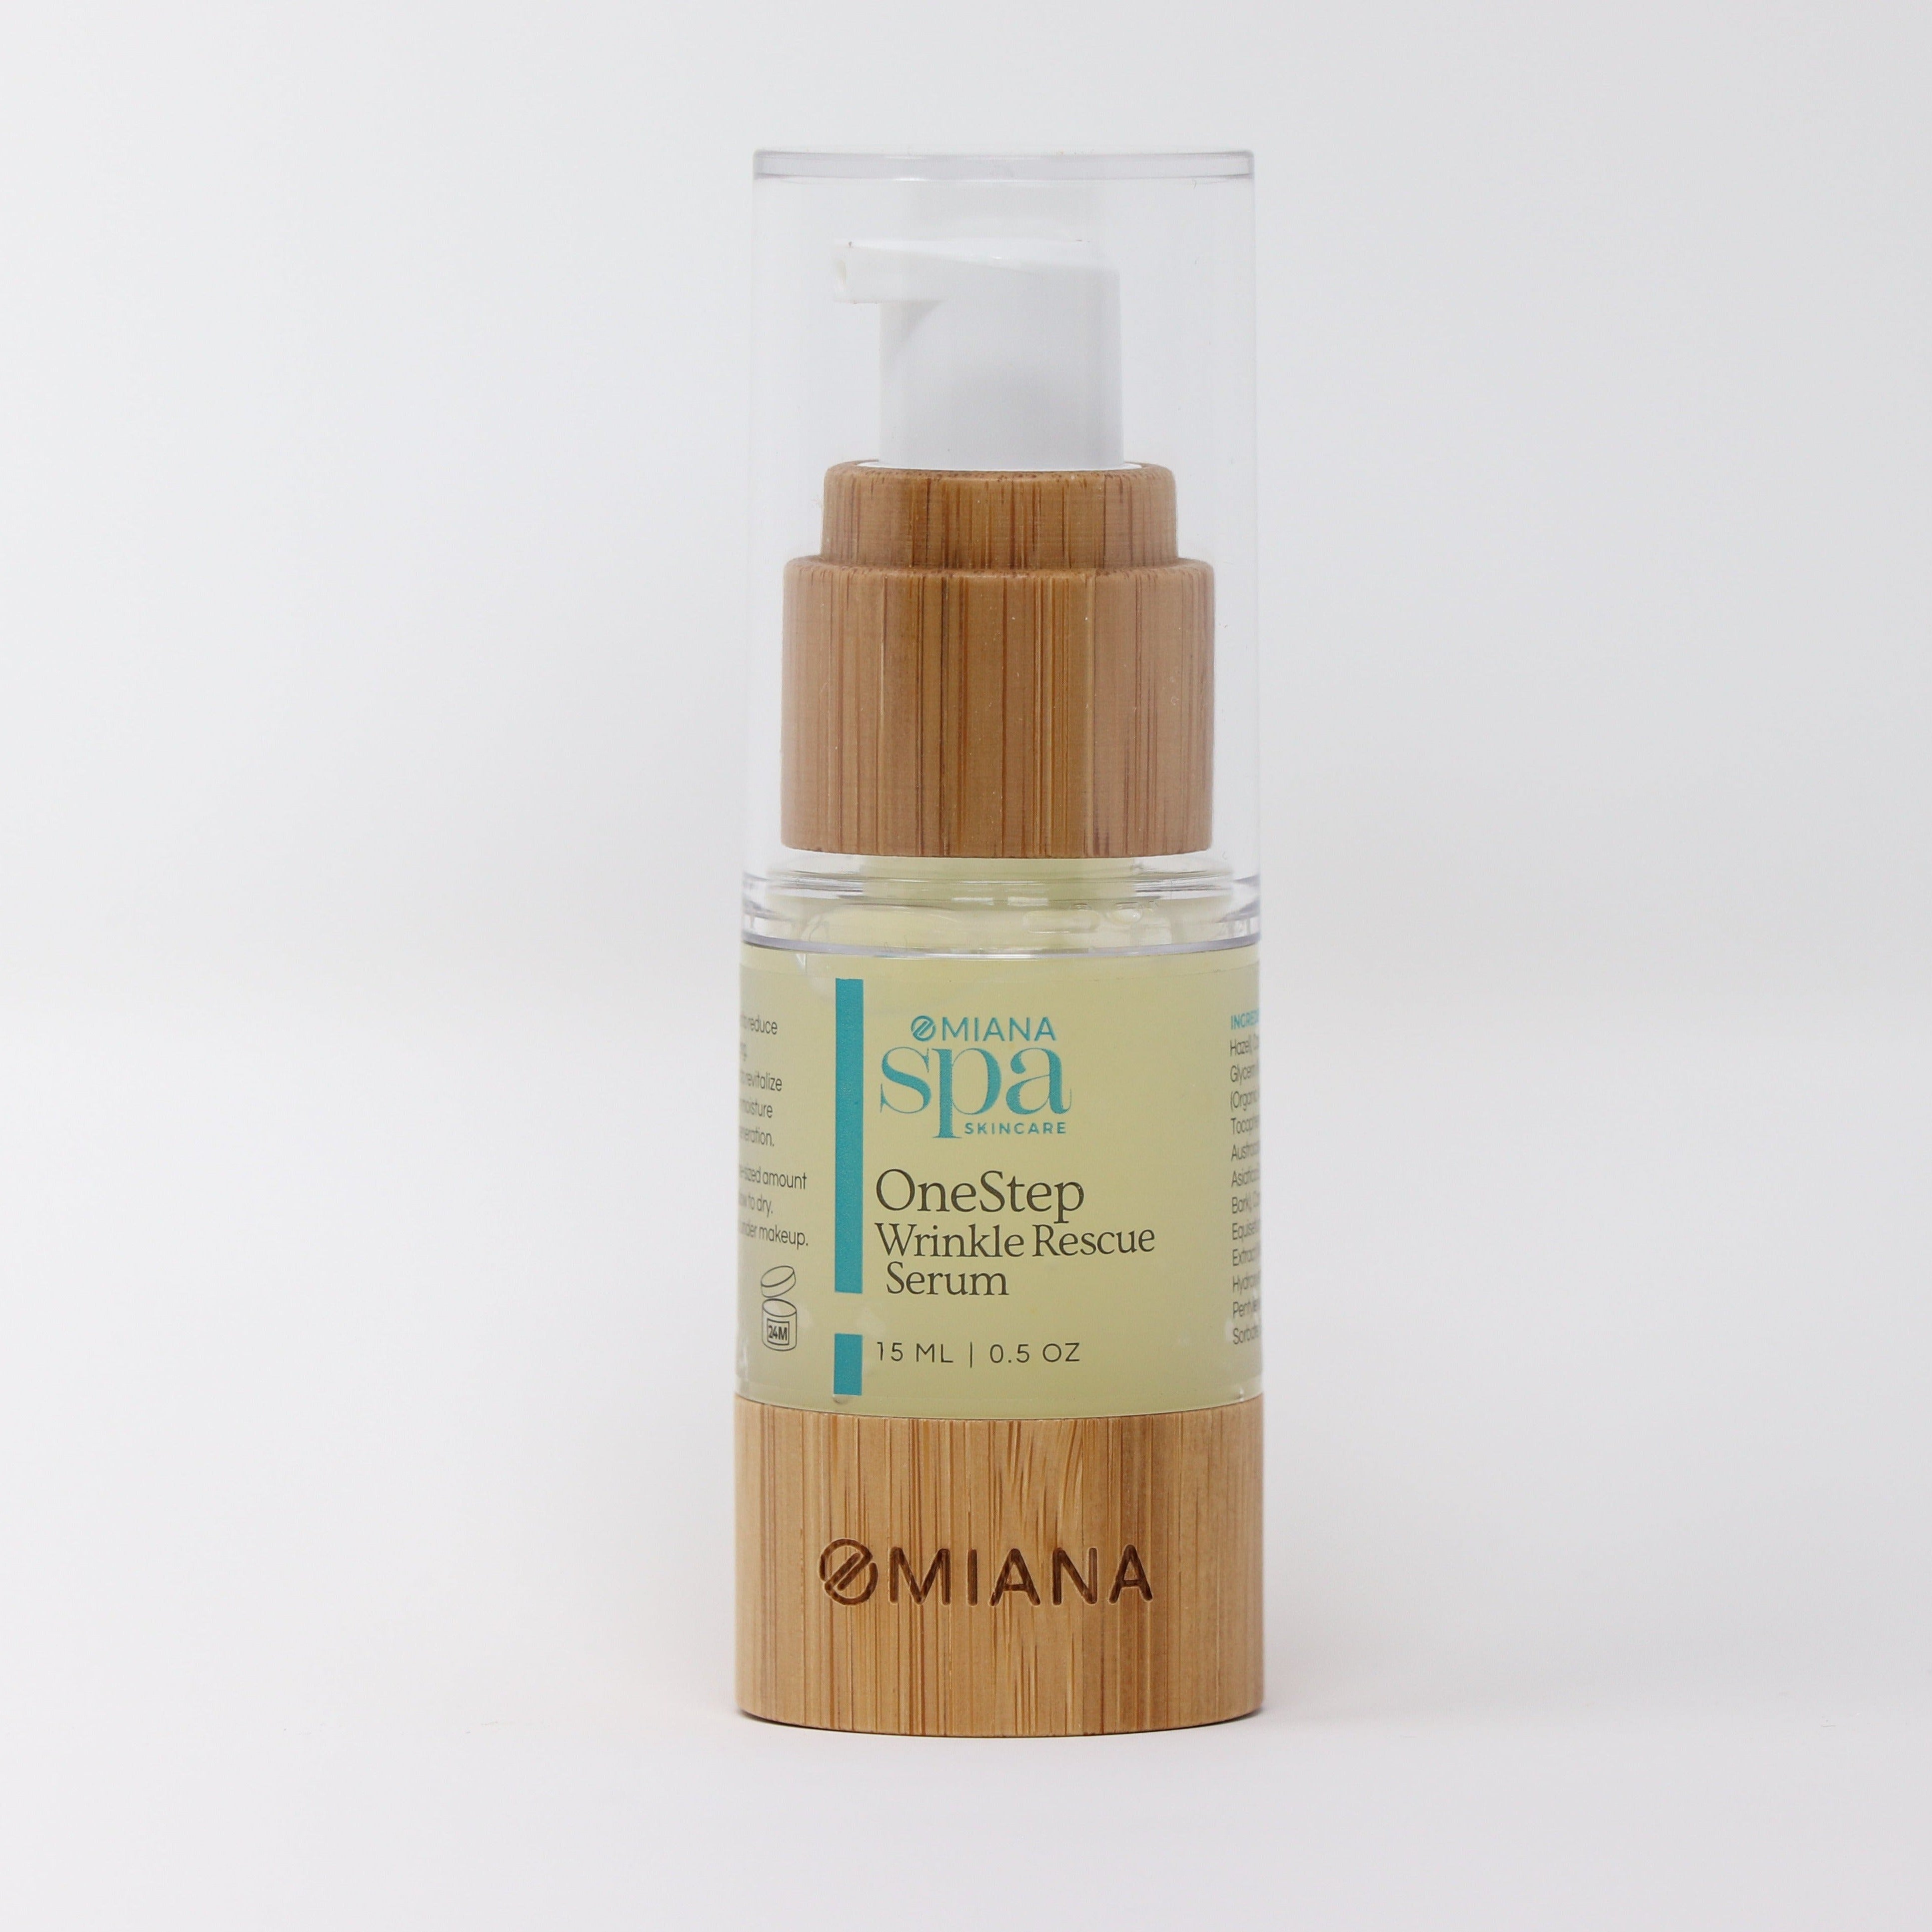 OneStep Wrinkle Rescue Serum - 100% Free From GMOs, Toxins, Artificial Fragrances, & More by Omiana